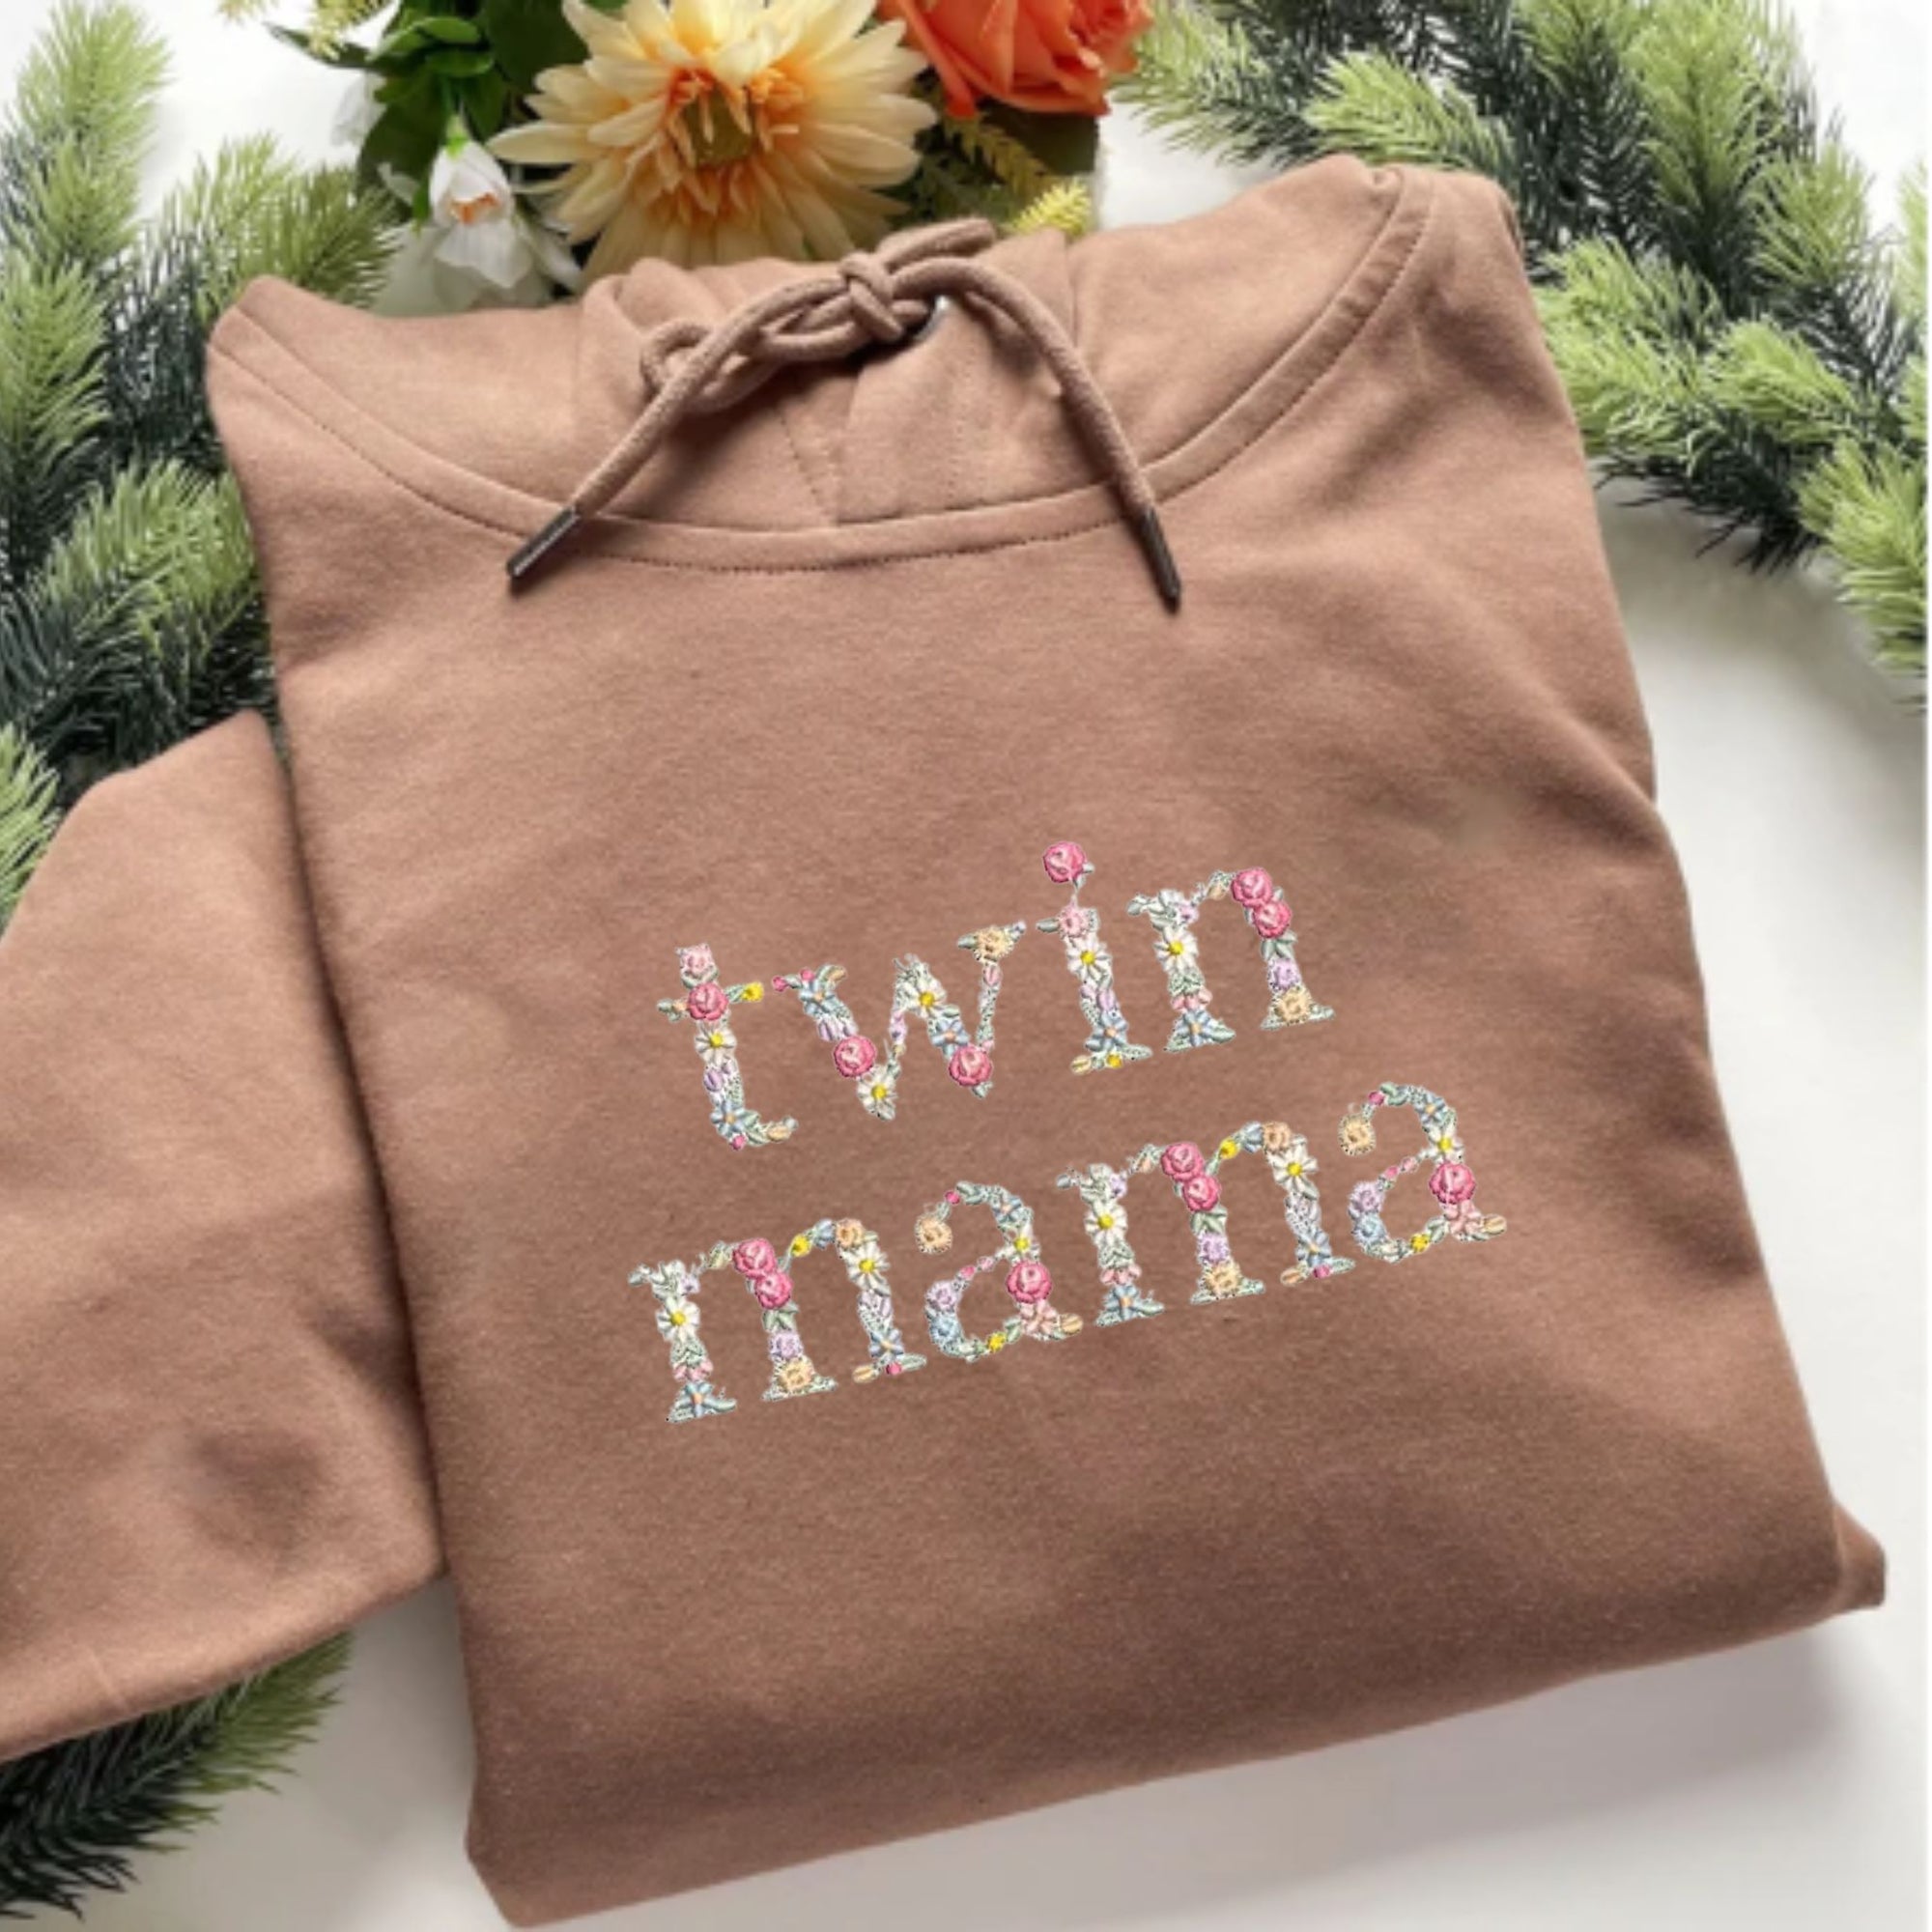 Embroidered Twin Mama Custom Hoodie, Personalized Hoode with Initial On Sleeve, Gift for Momof an initial on the sleeve.